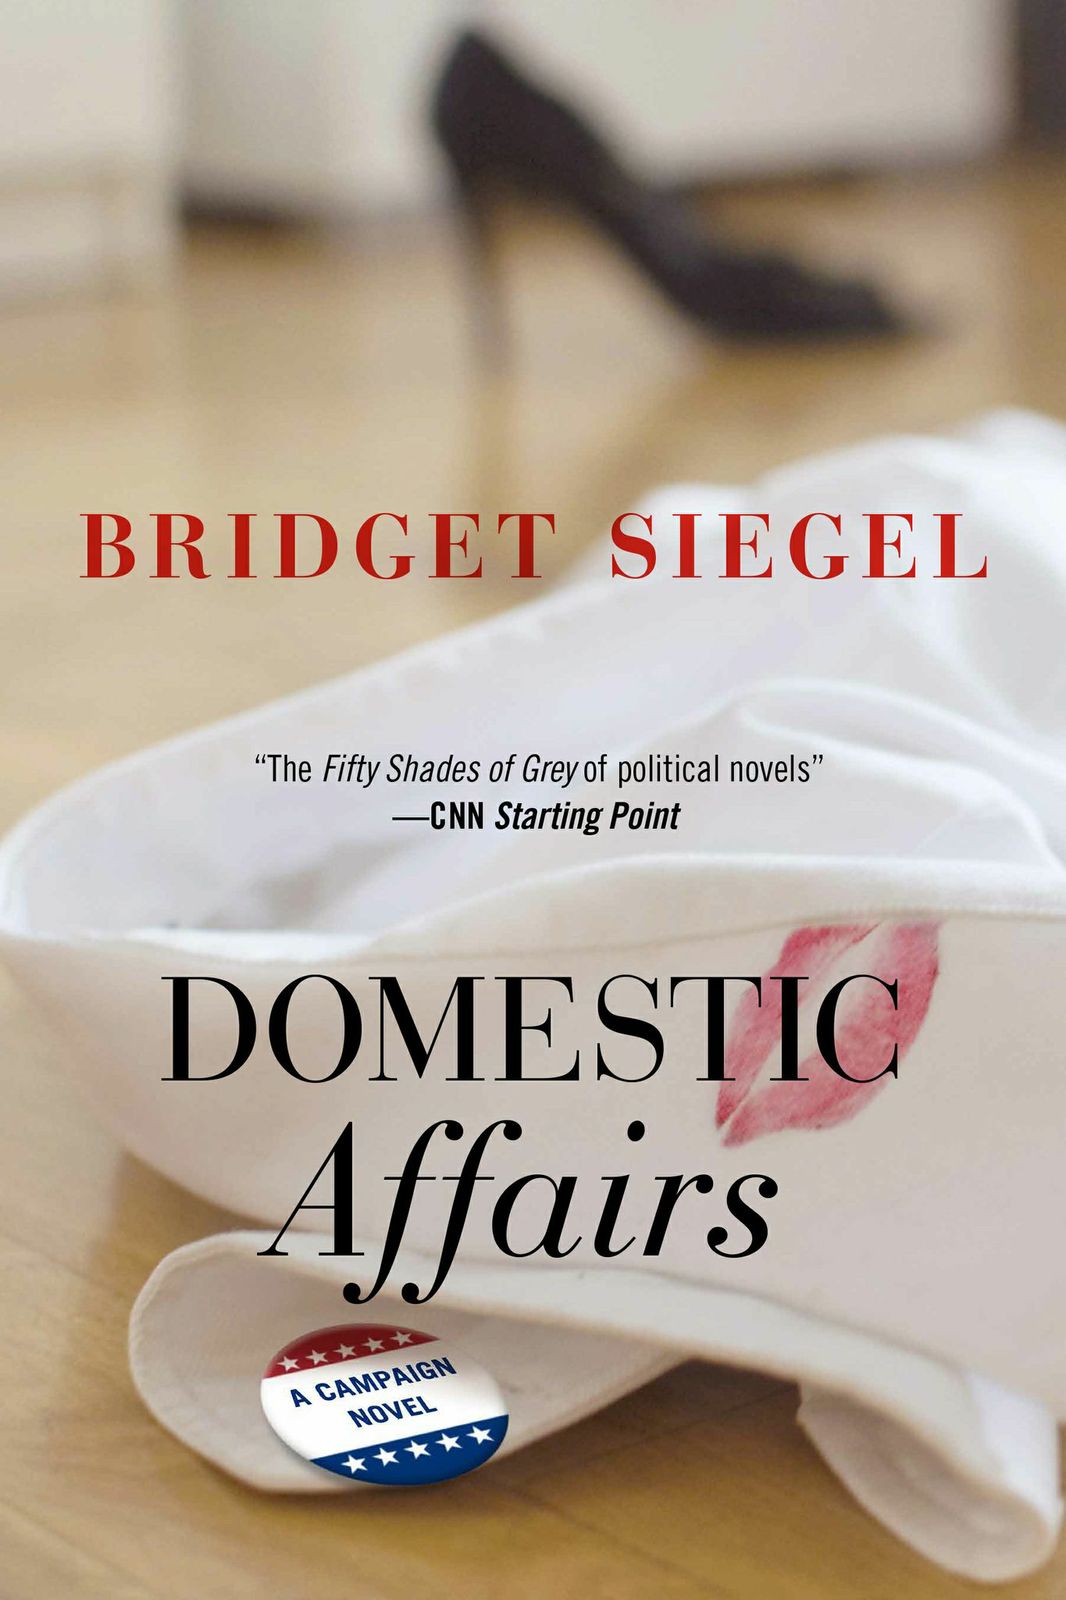 Book Review: Domestic Affairs